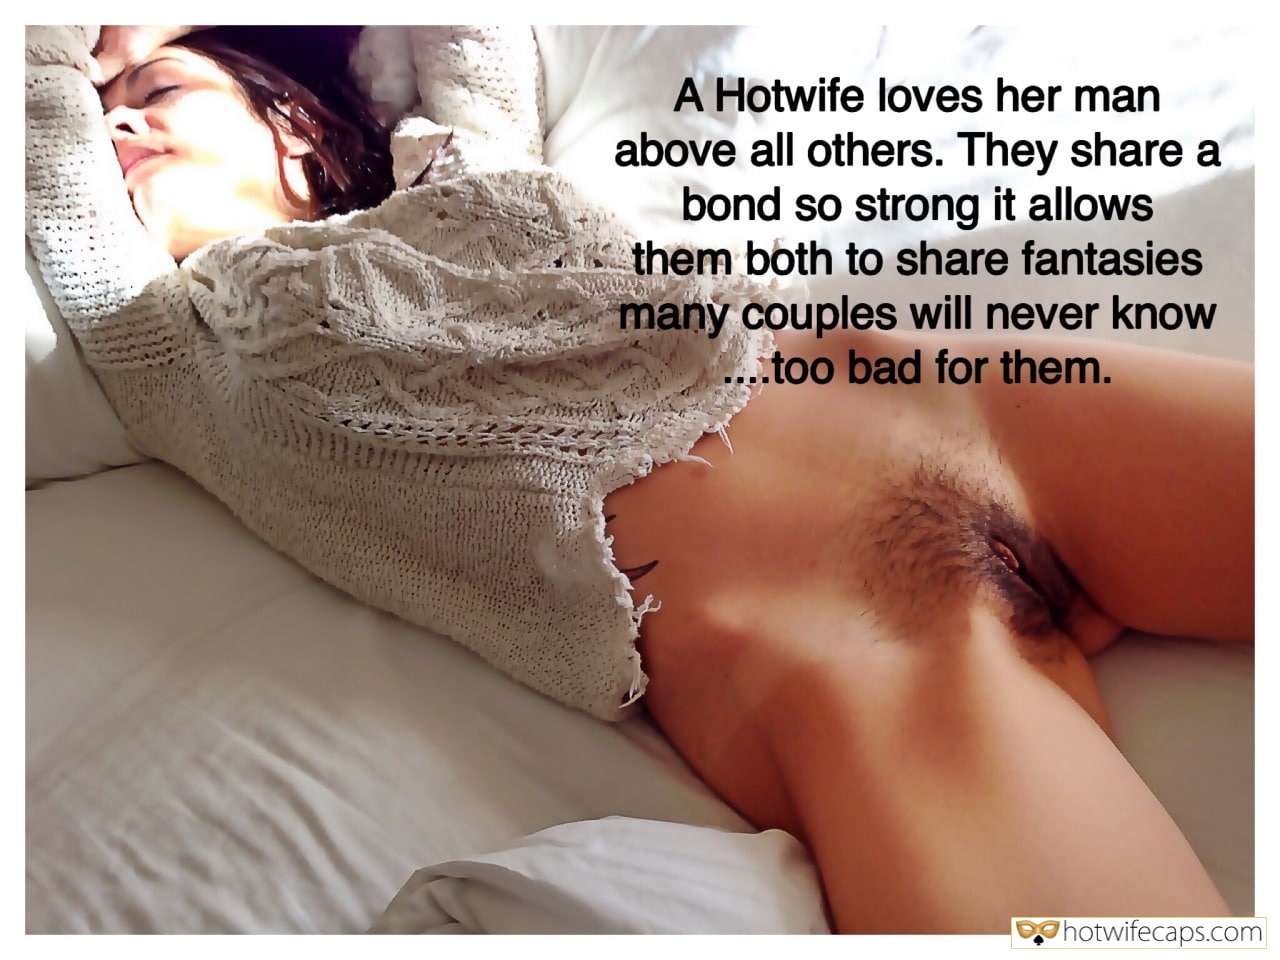 My Favorite hotwife caption: A Hotwife loves her man above all others. They share a bond so strong it allows them both to share fantasies many couples will never know …too bad for them. lesbian wife husband life captions Her Horny Imaginations for Hairy...